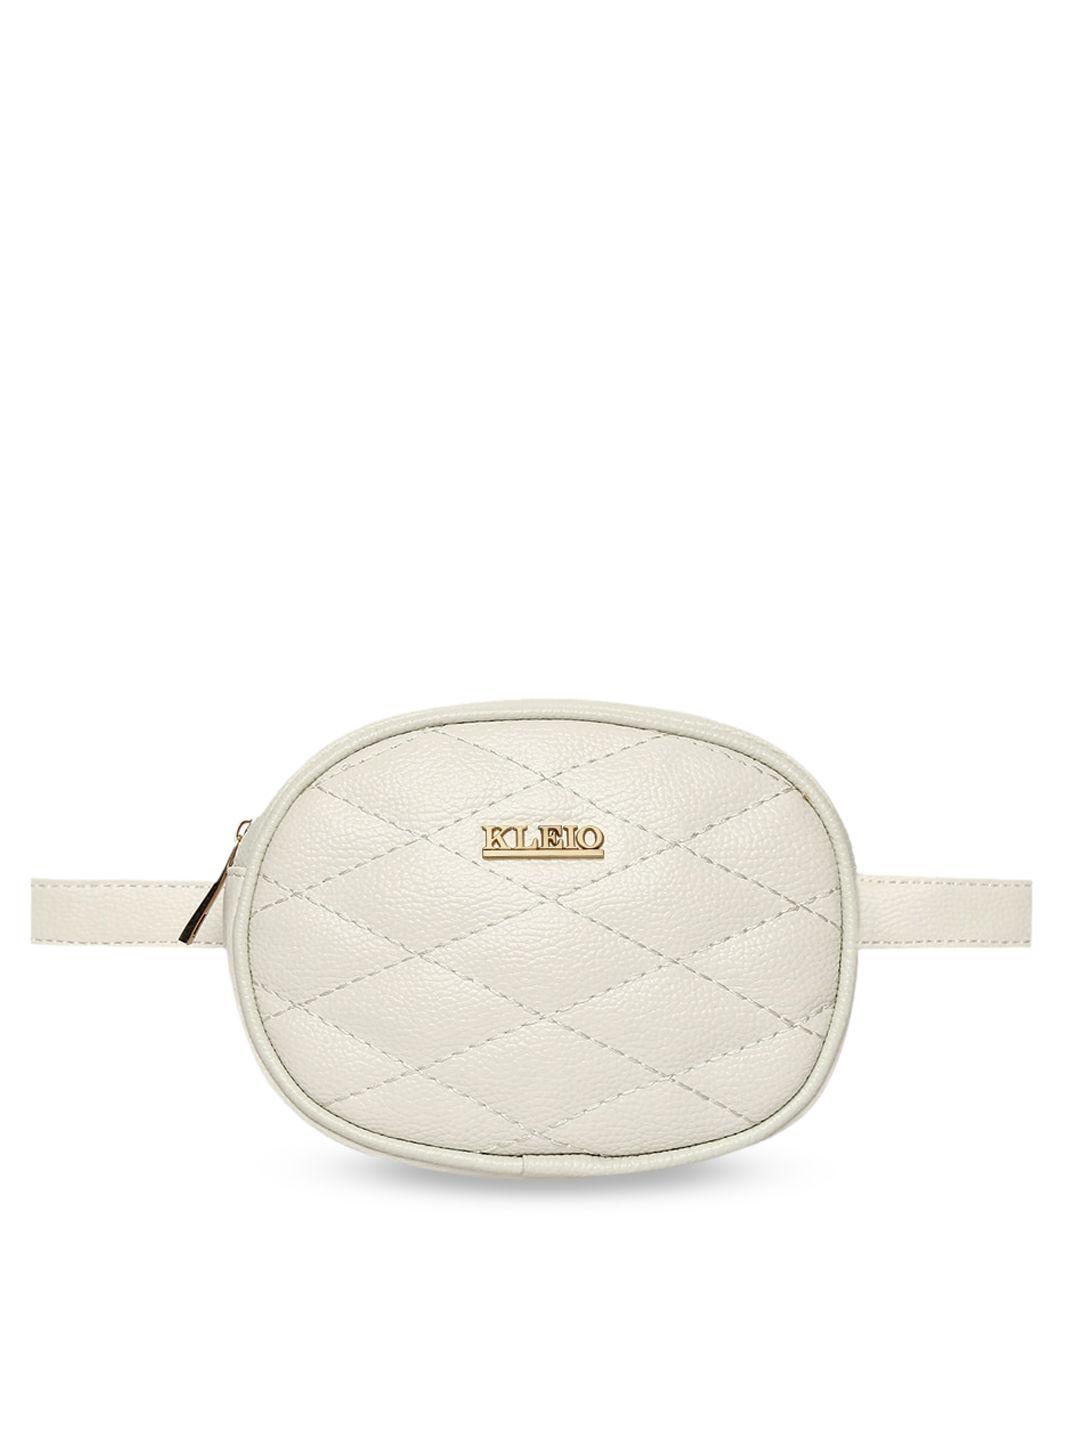 kleio quilted sling bag